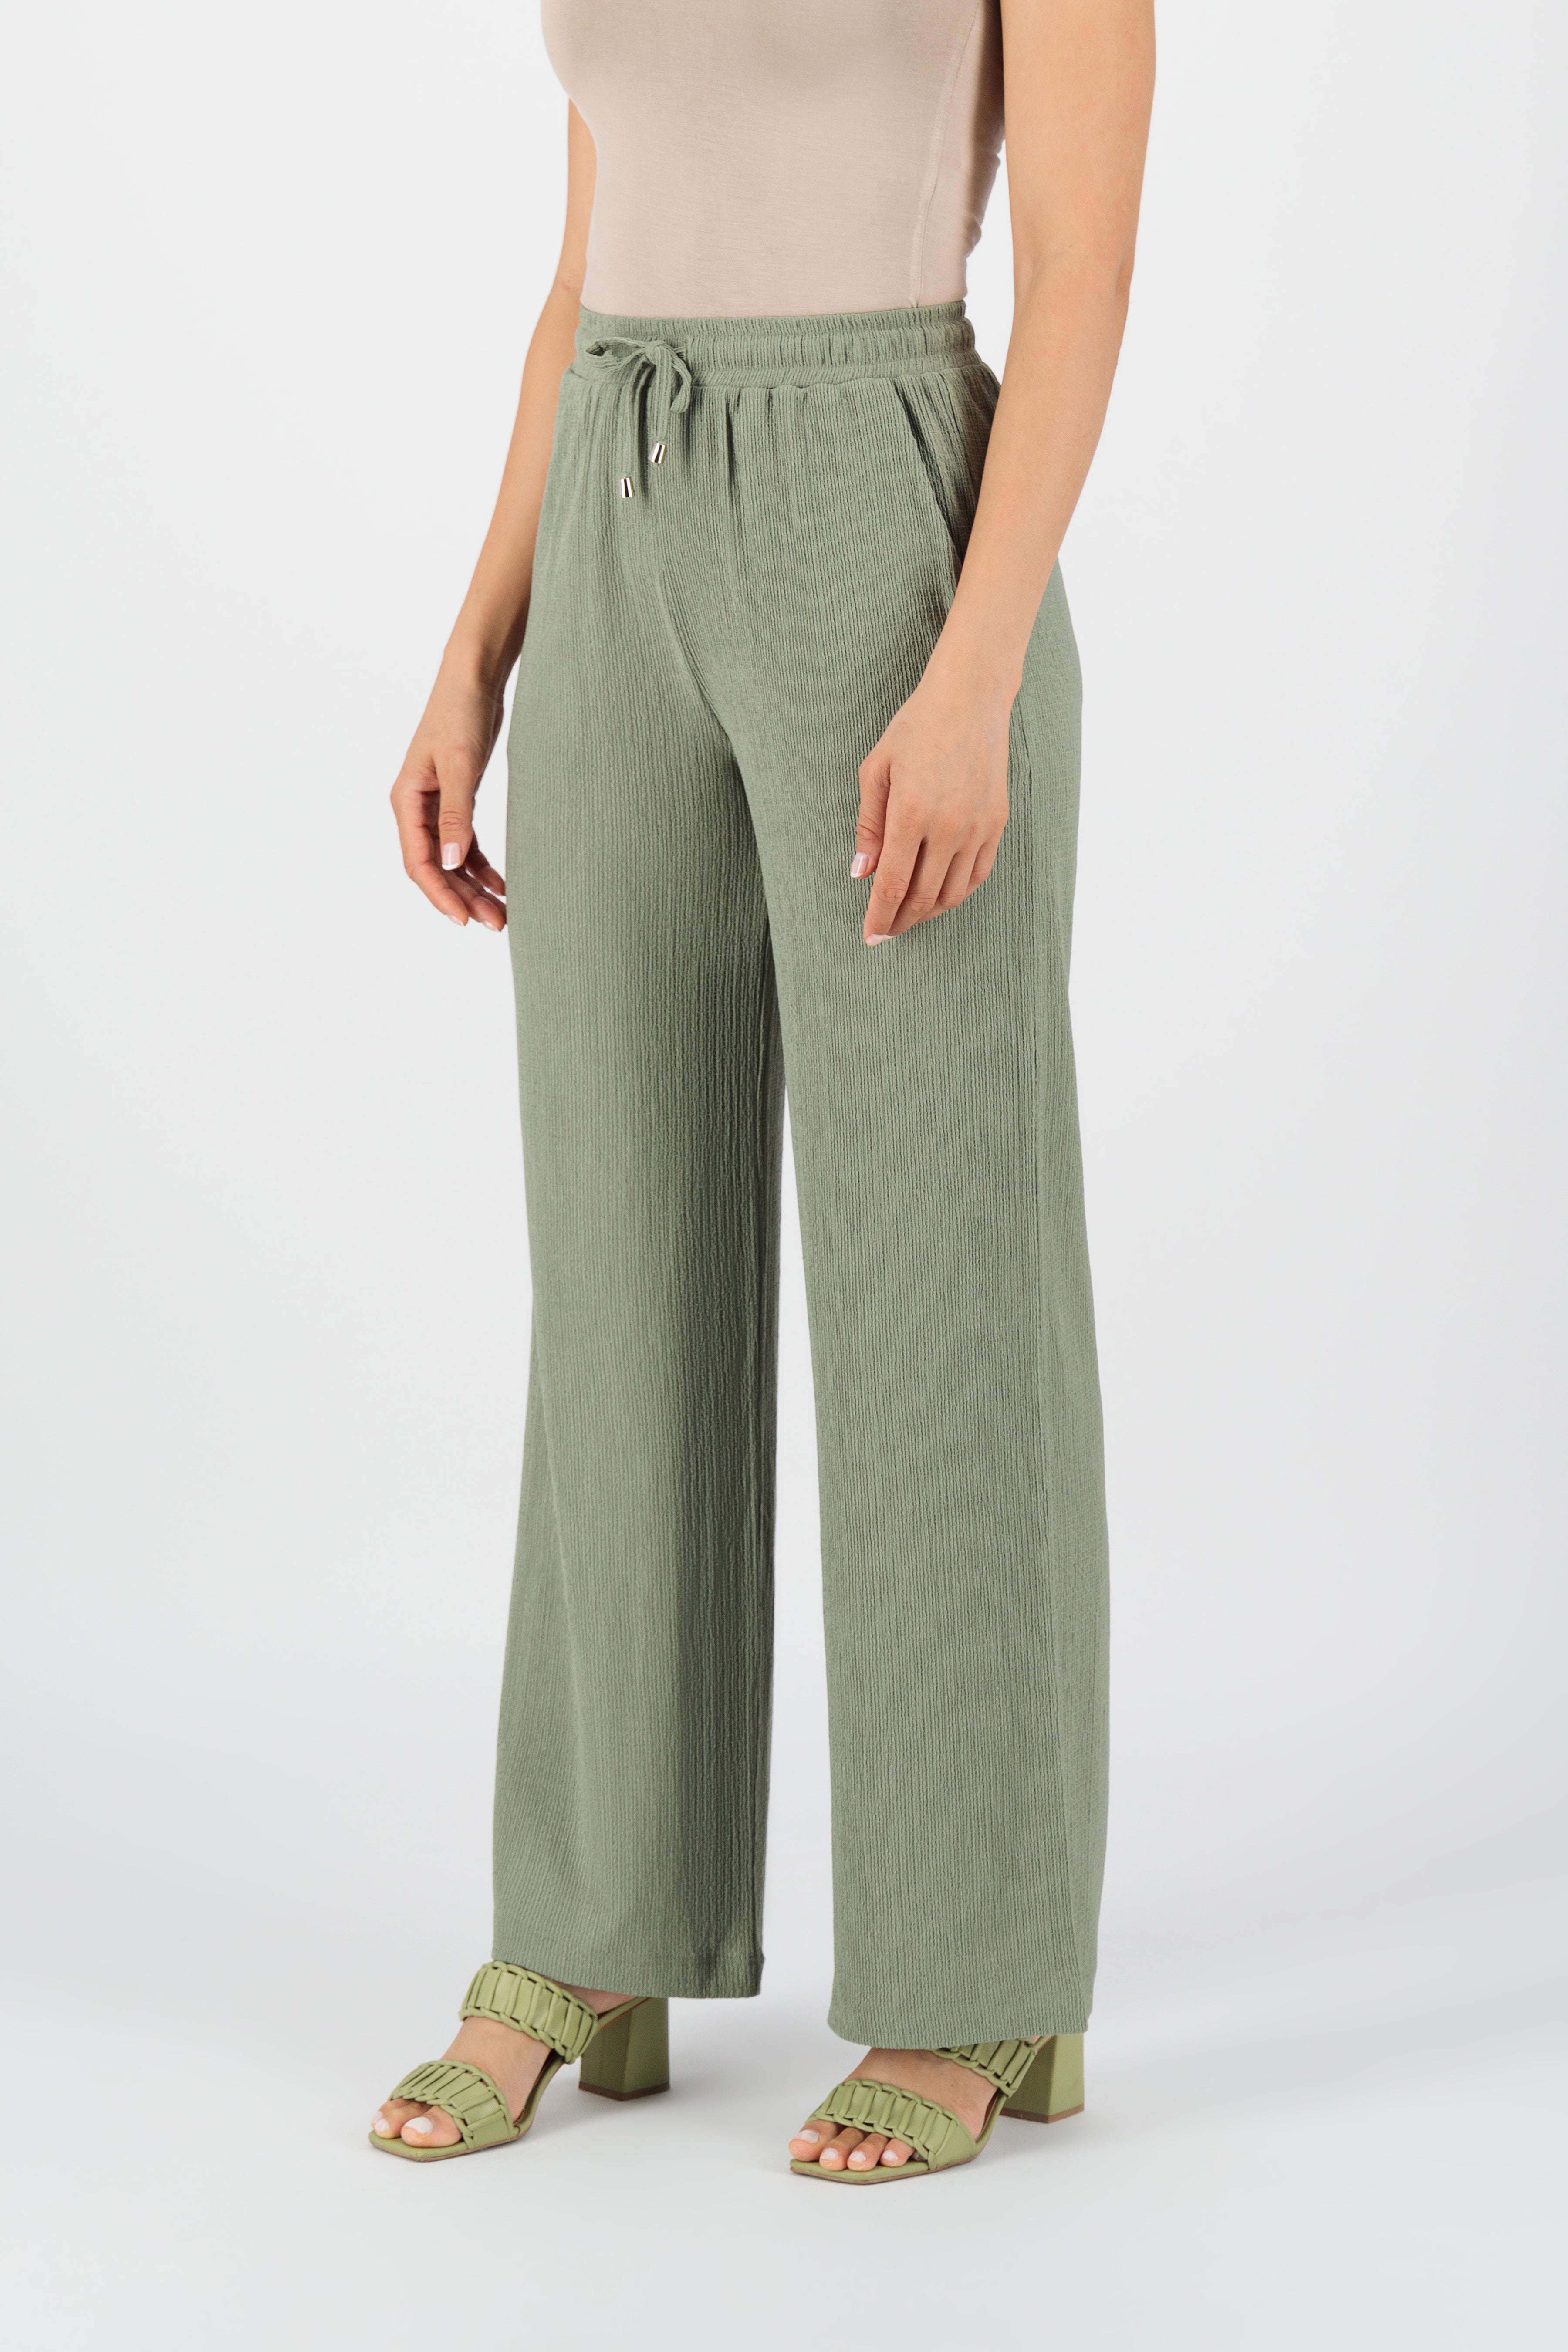 CA - Relaxed Fit Pants - Olive